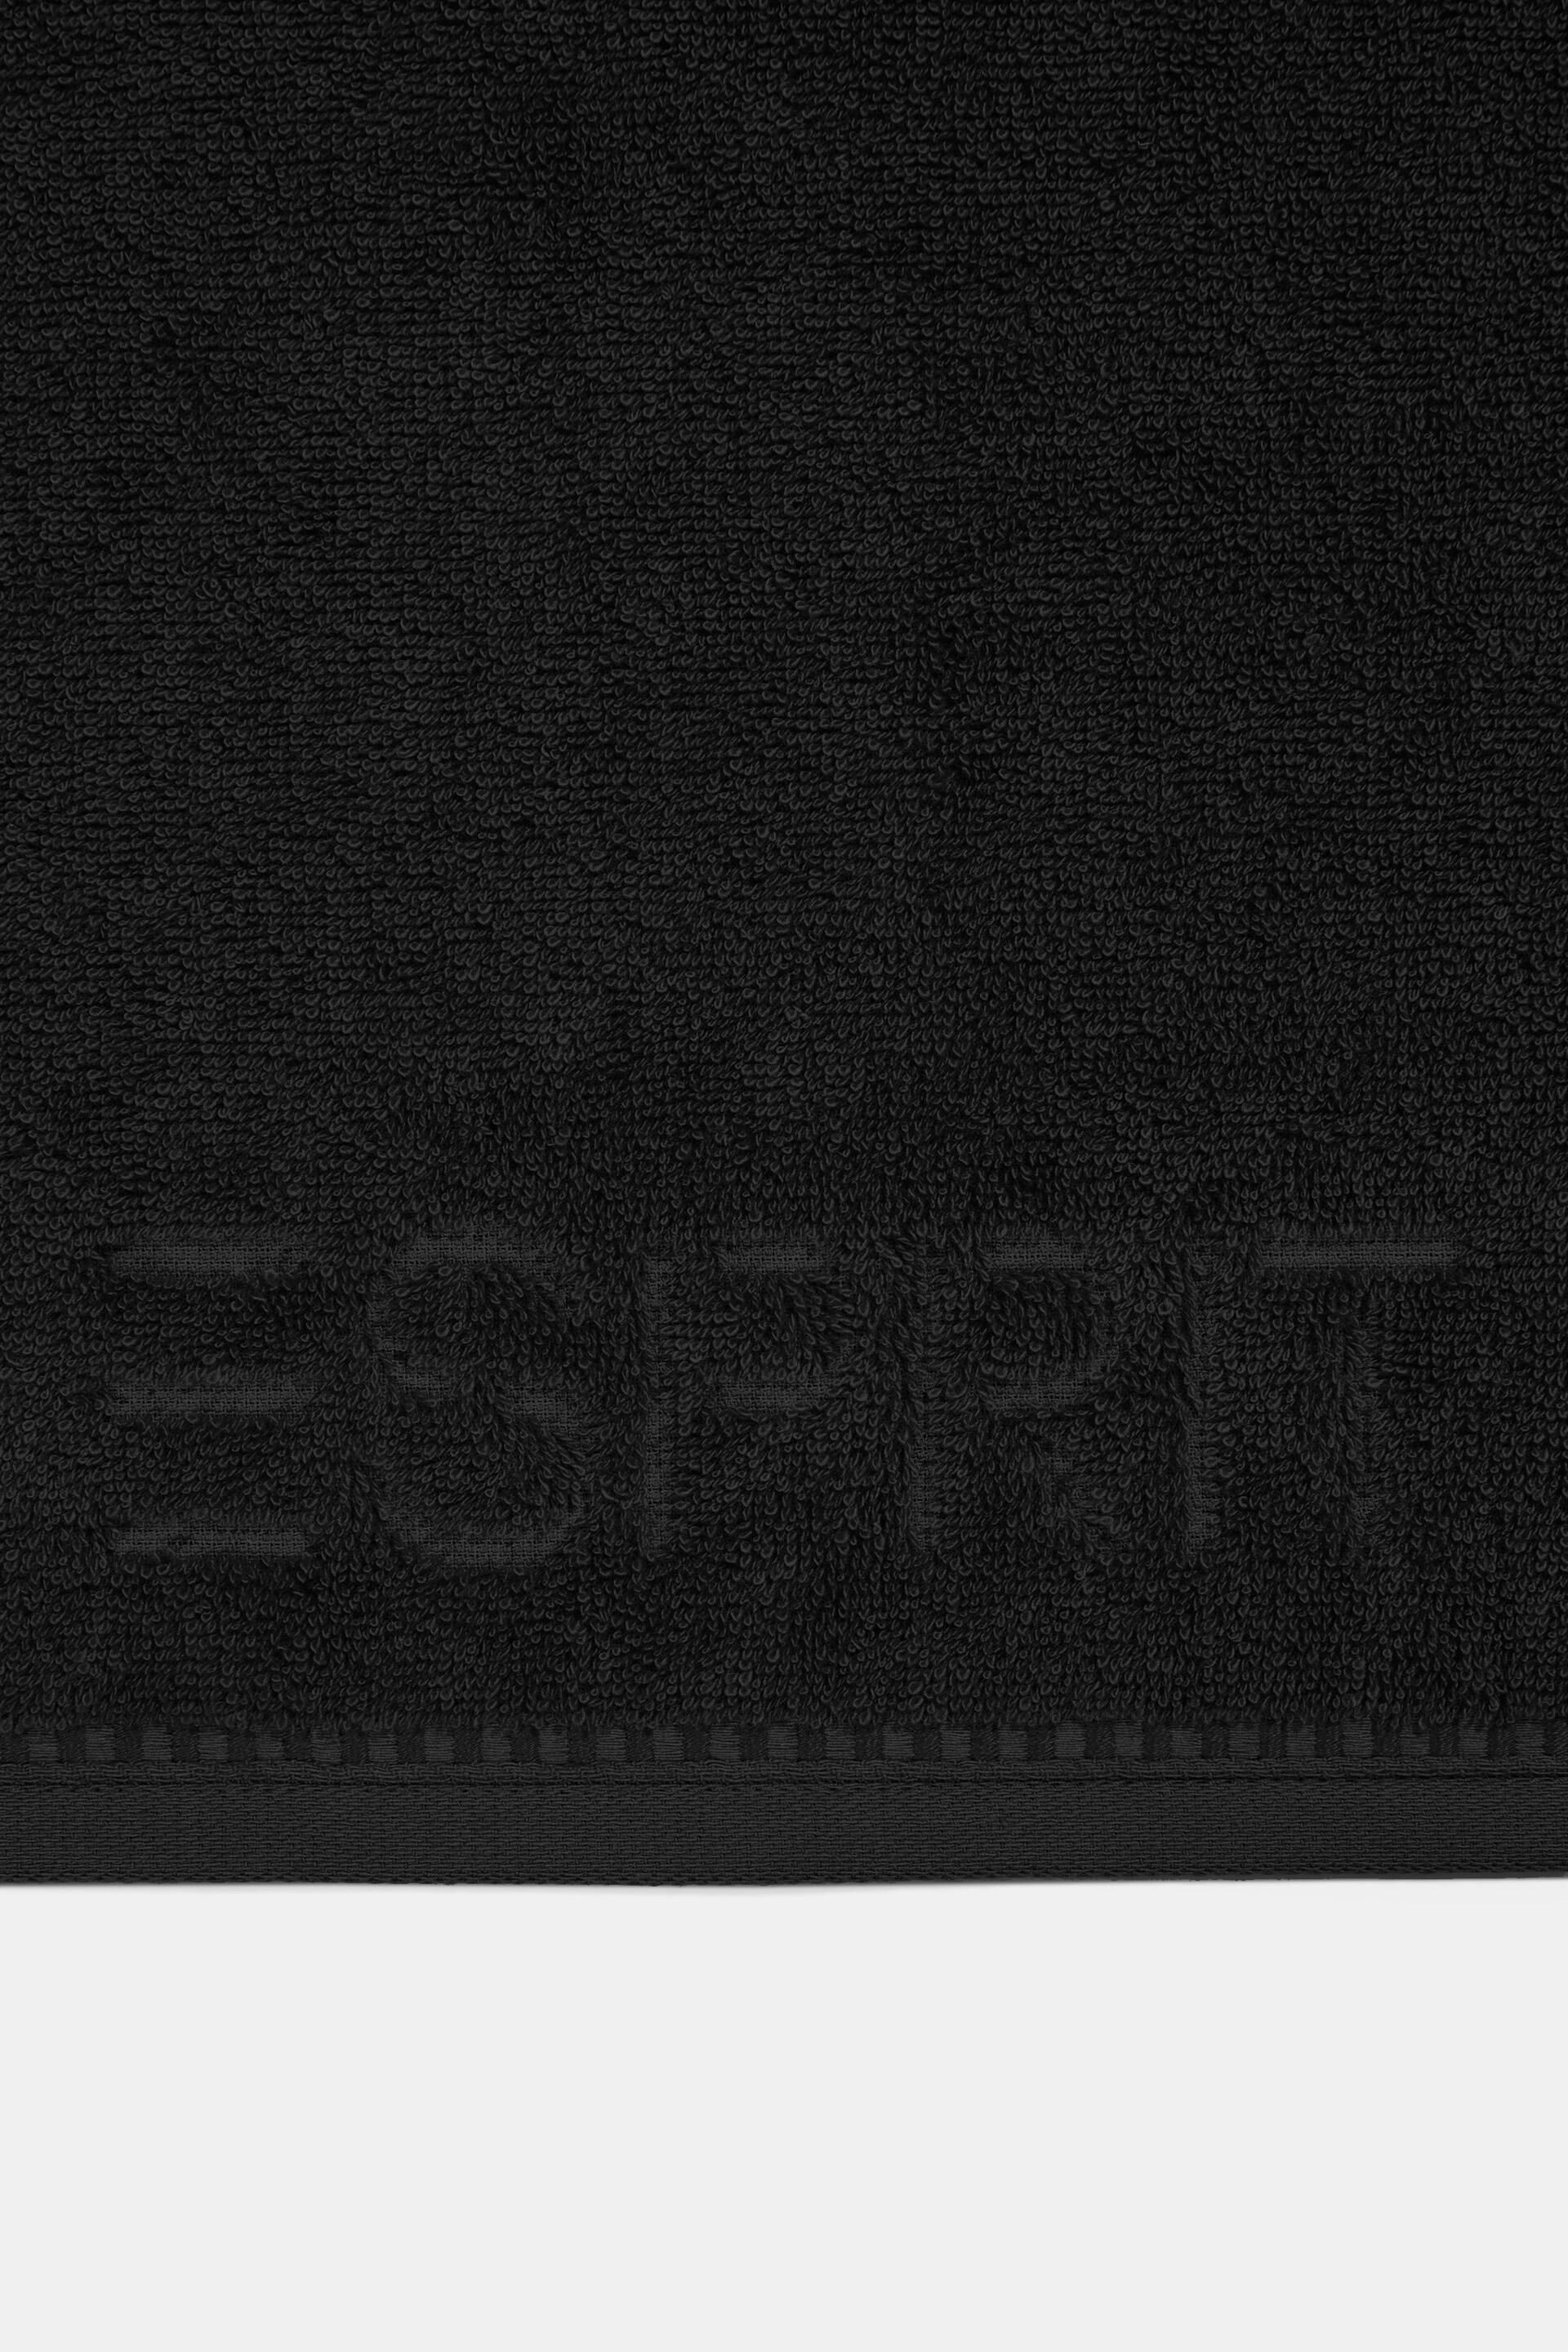 Esprit Terry cloth collection towel